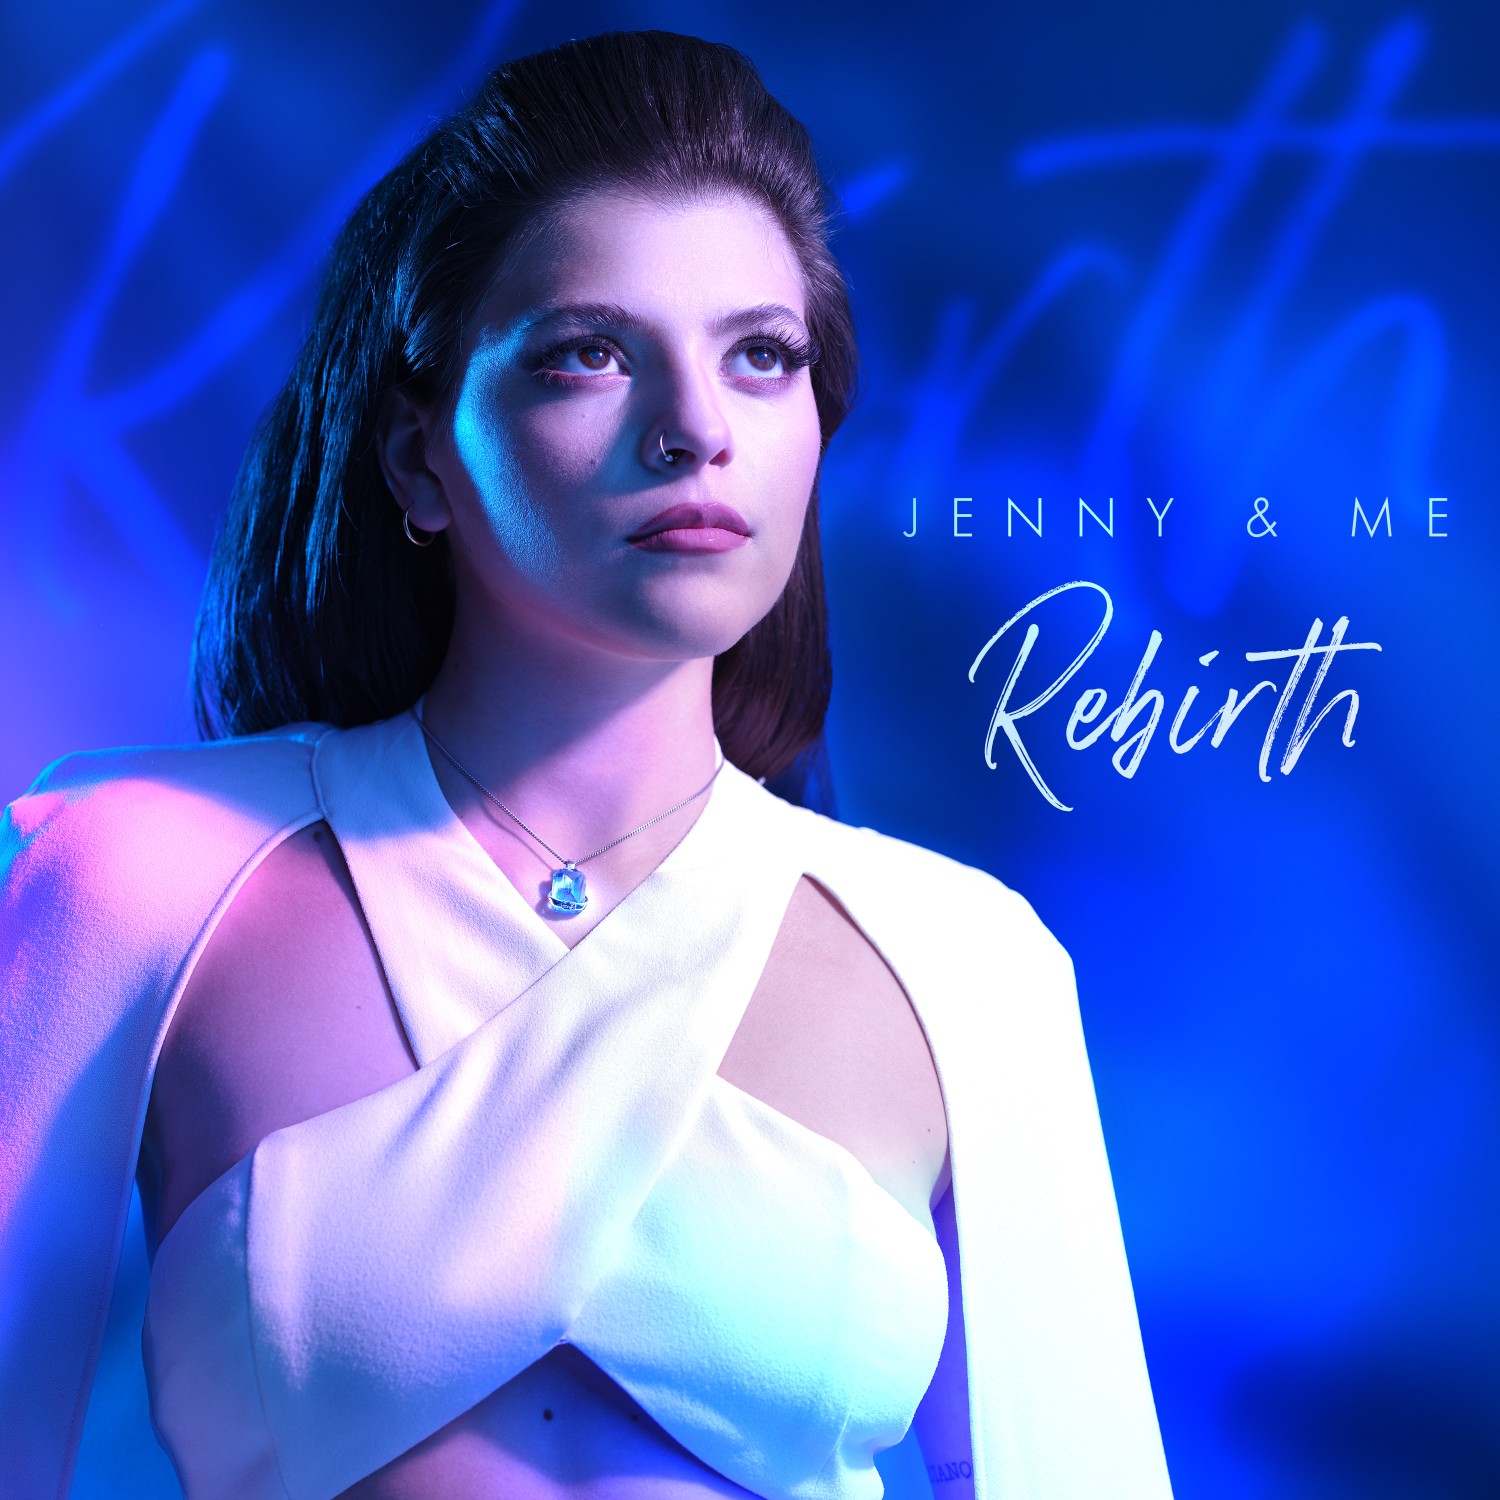 The latest song "Rebirth" by Jenny & Me is now out!